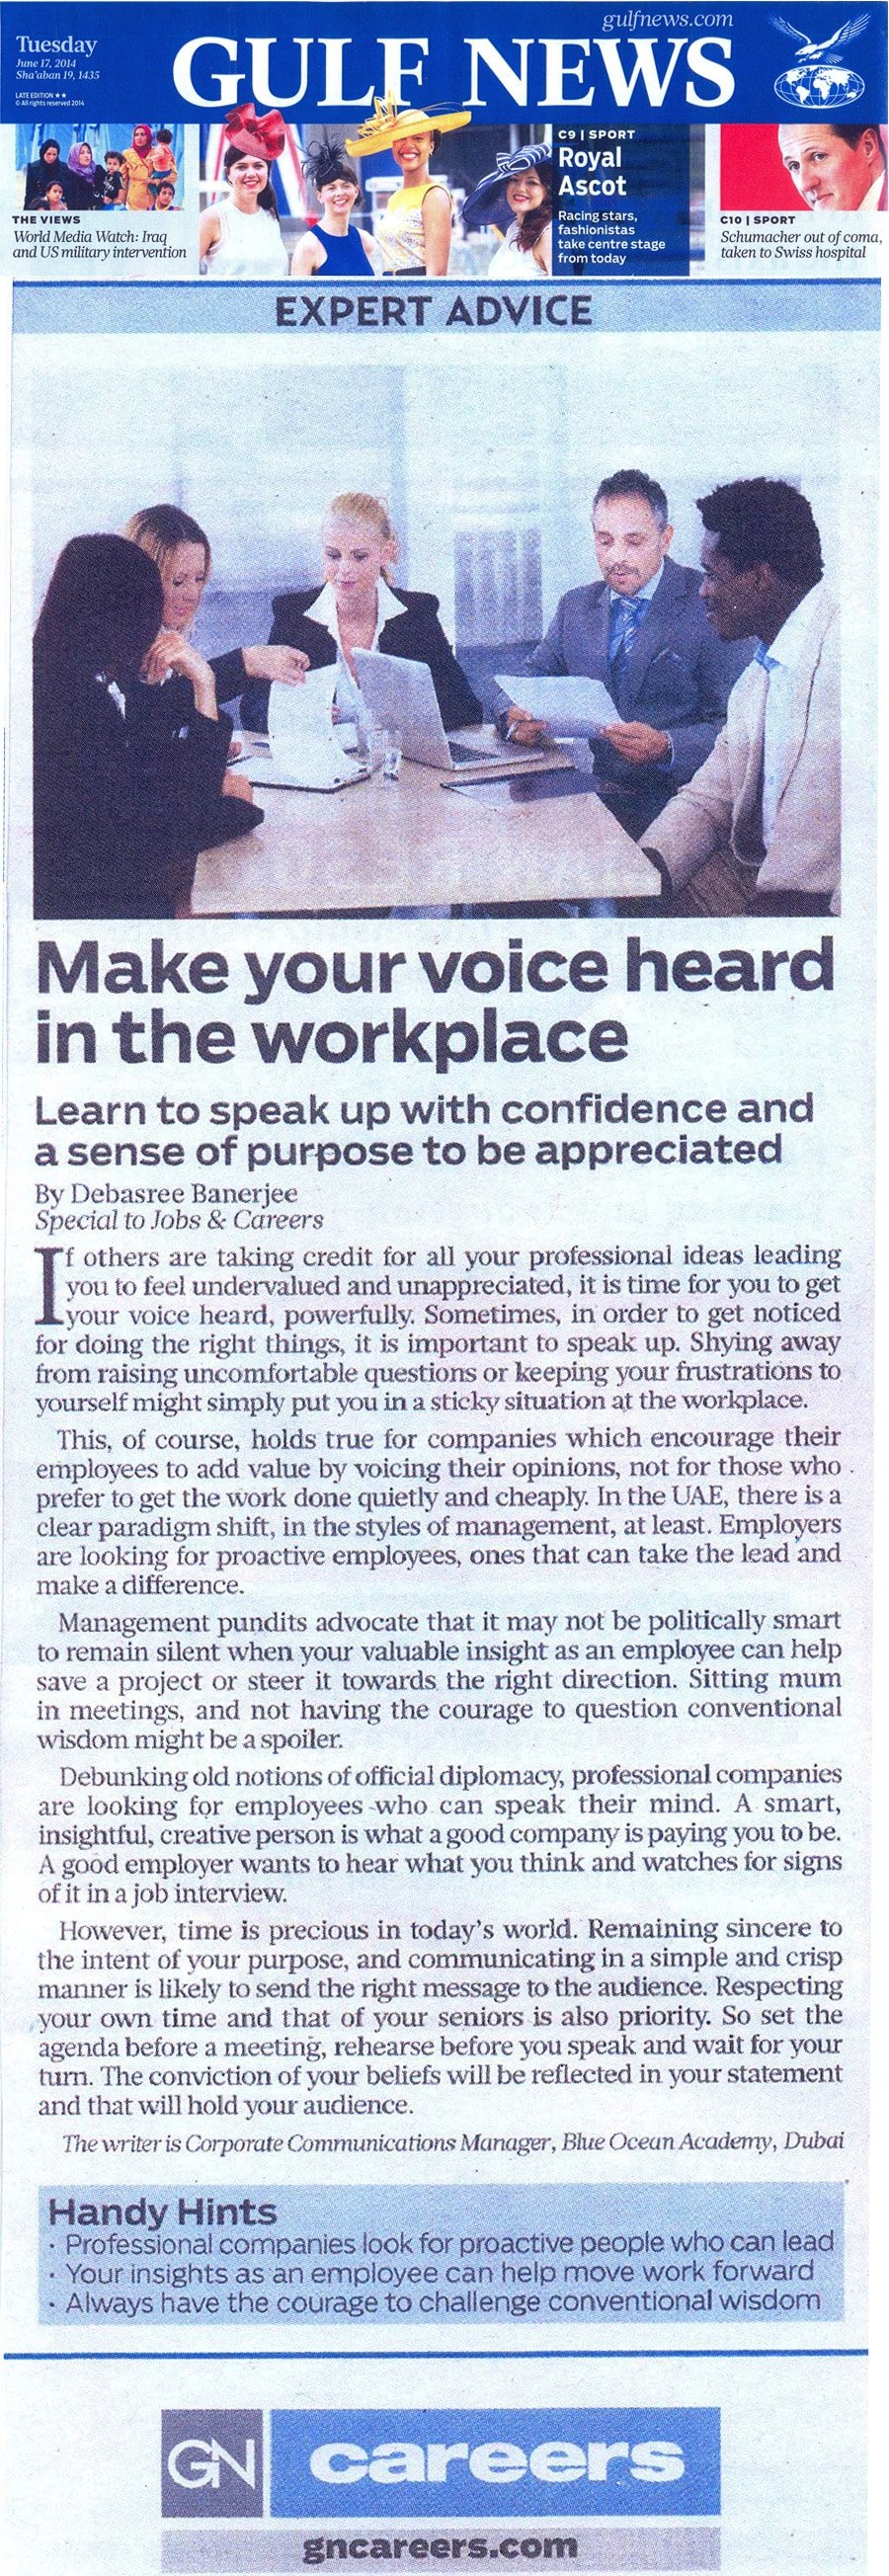 Make your voice heard in the workplace